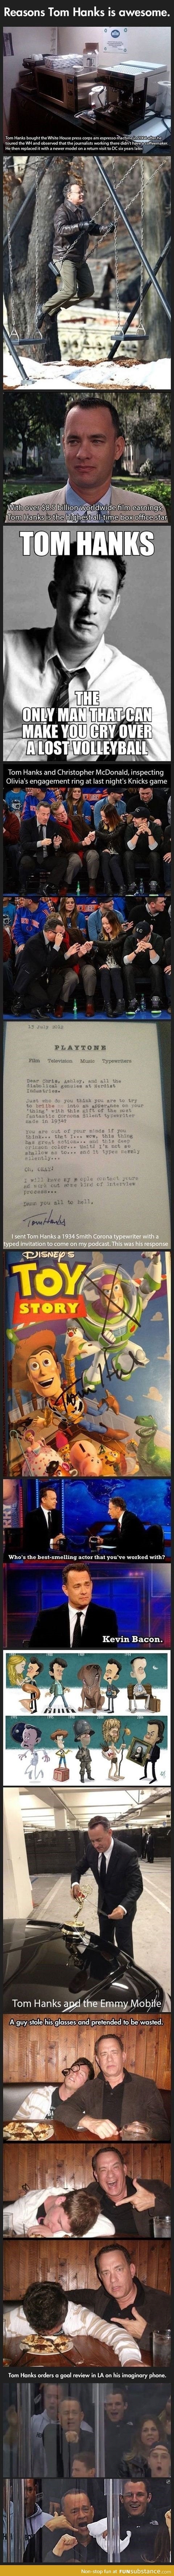 Reasons Tom Hanks Is Awesome